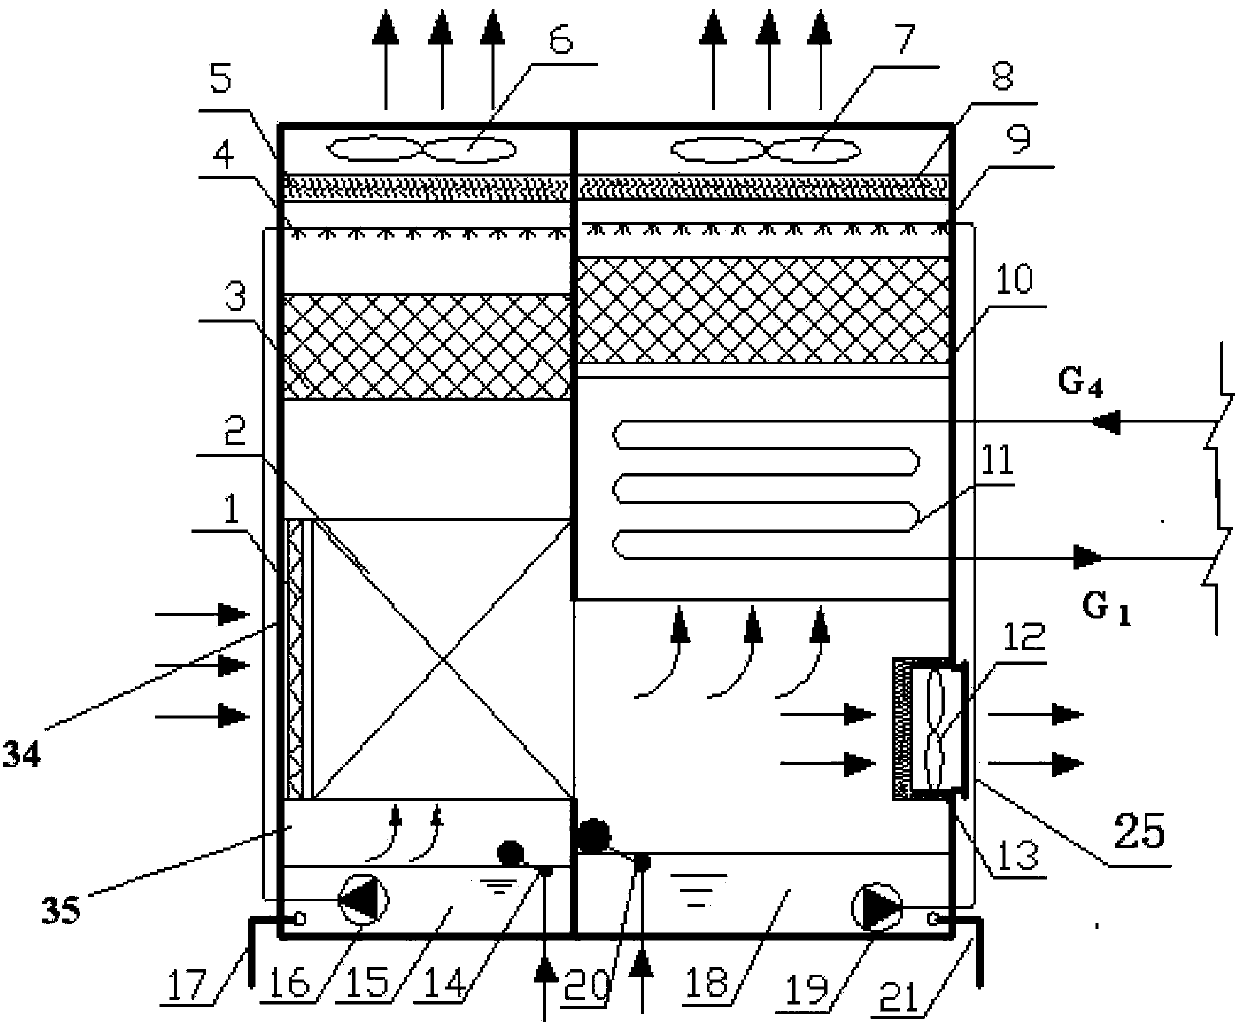 Air conditioning system combining evaporation cooling, solar energy and semiconductor